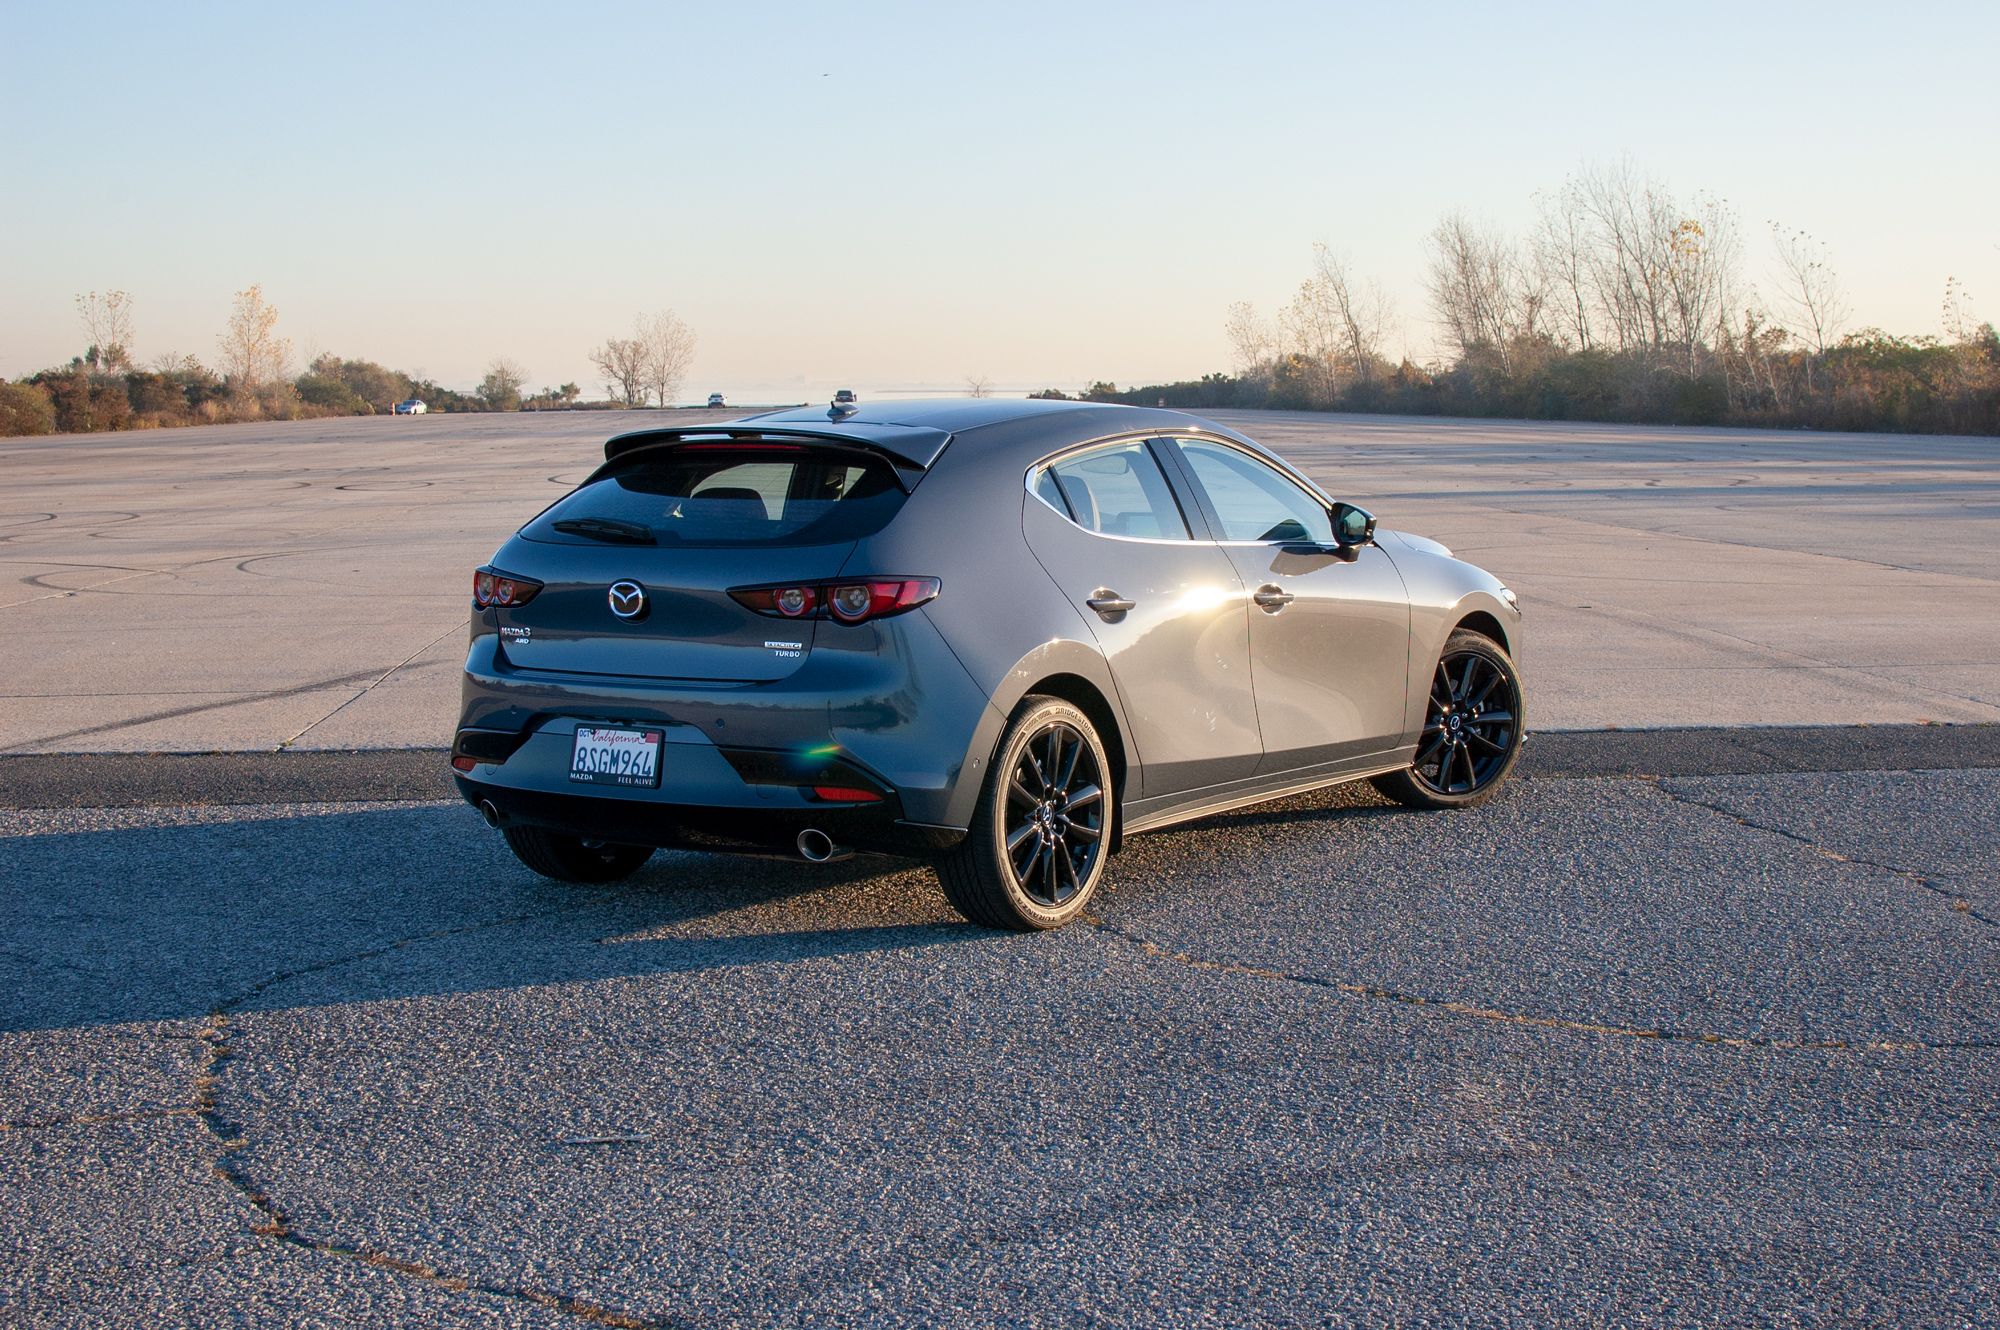 Opdage tale support 2021 Mazda 3 Turbo Is a Luxury Hatchback With 320 Lb-Ft of Torque